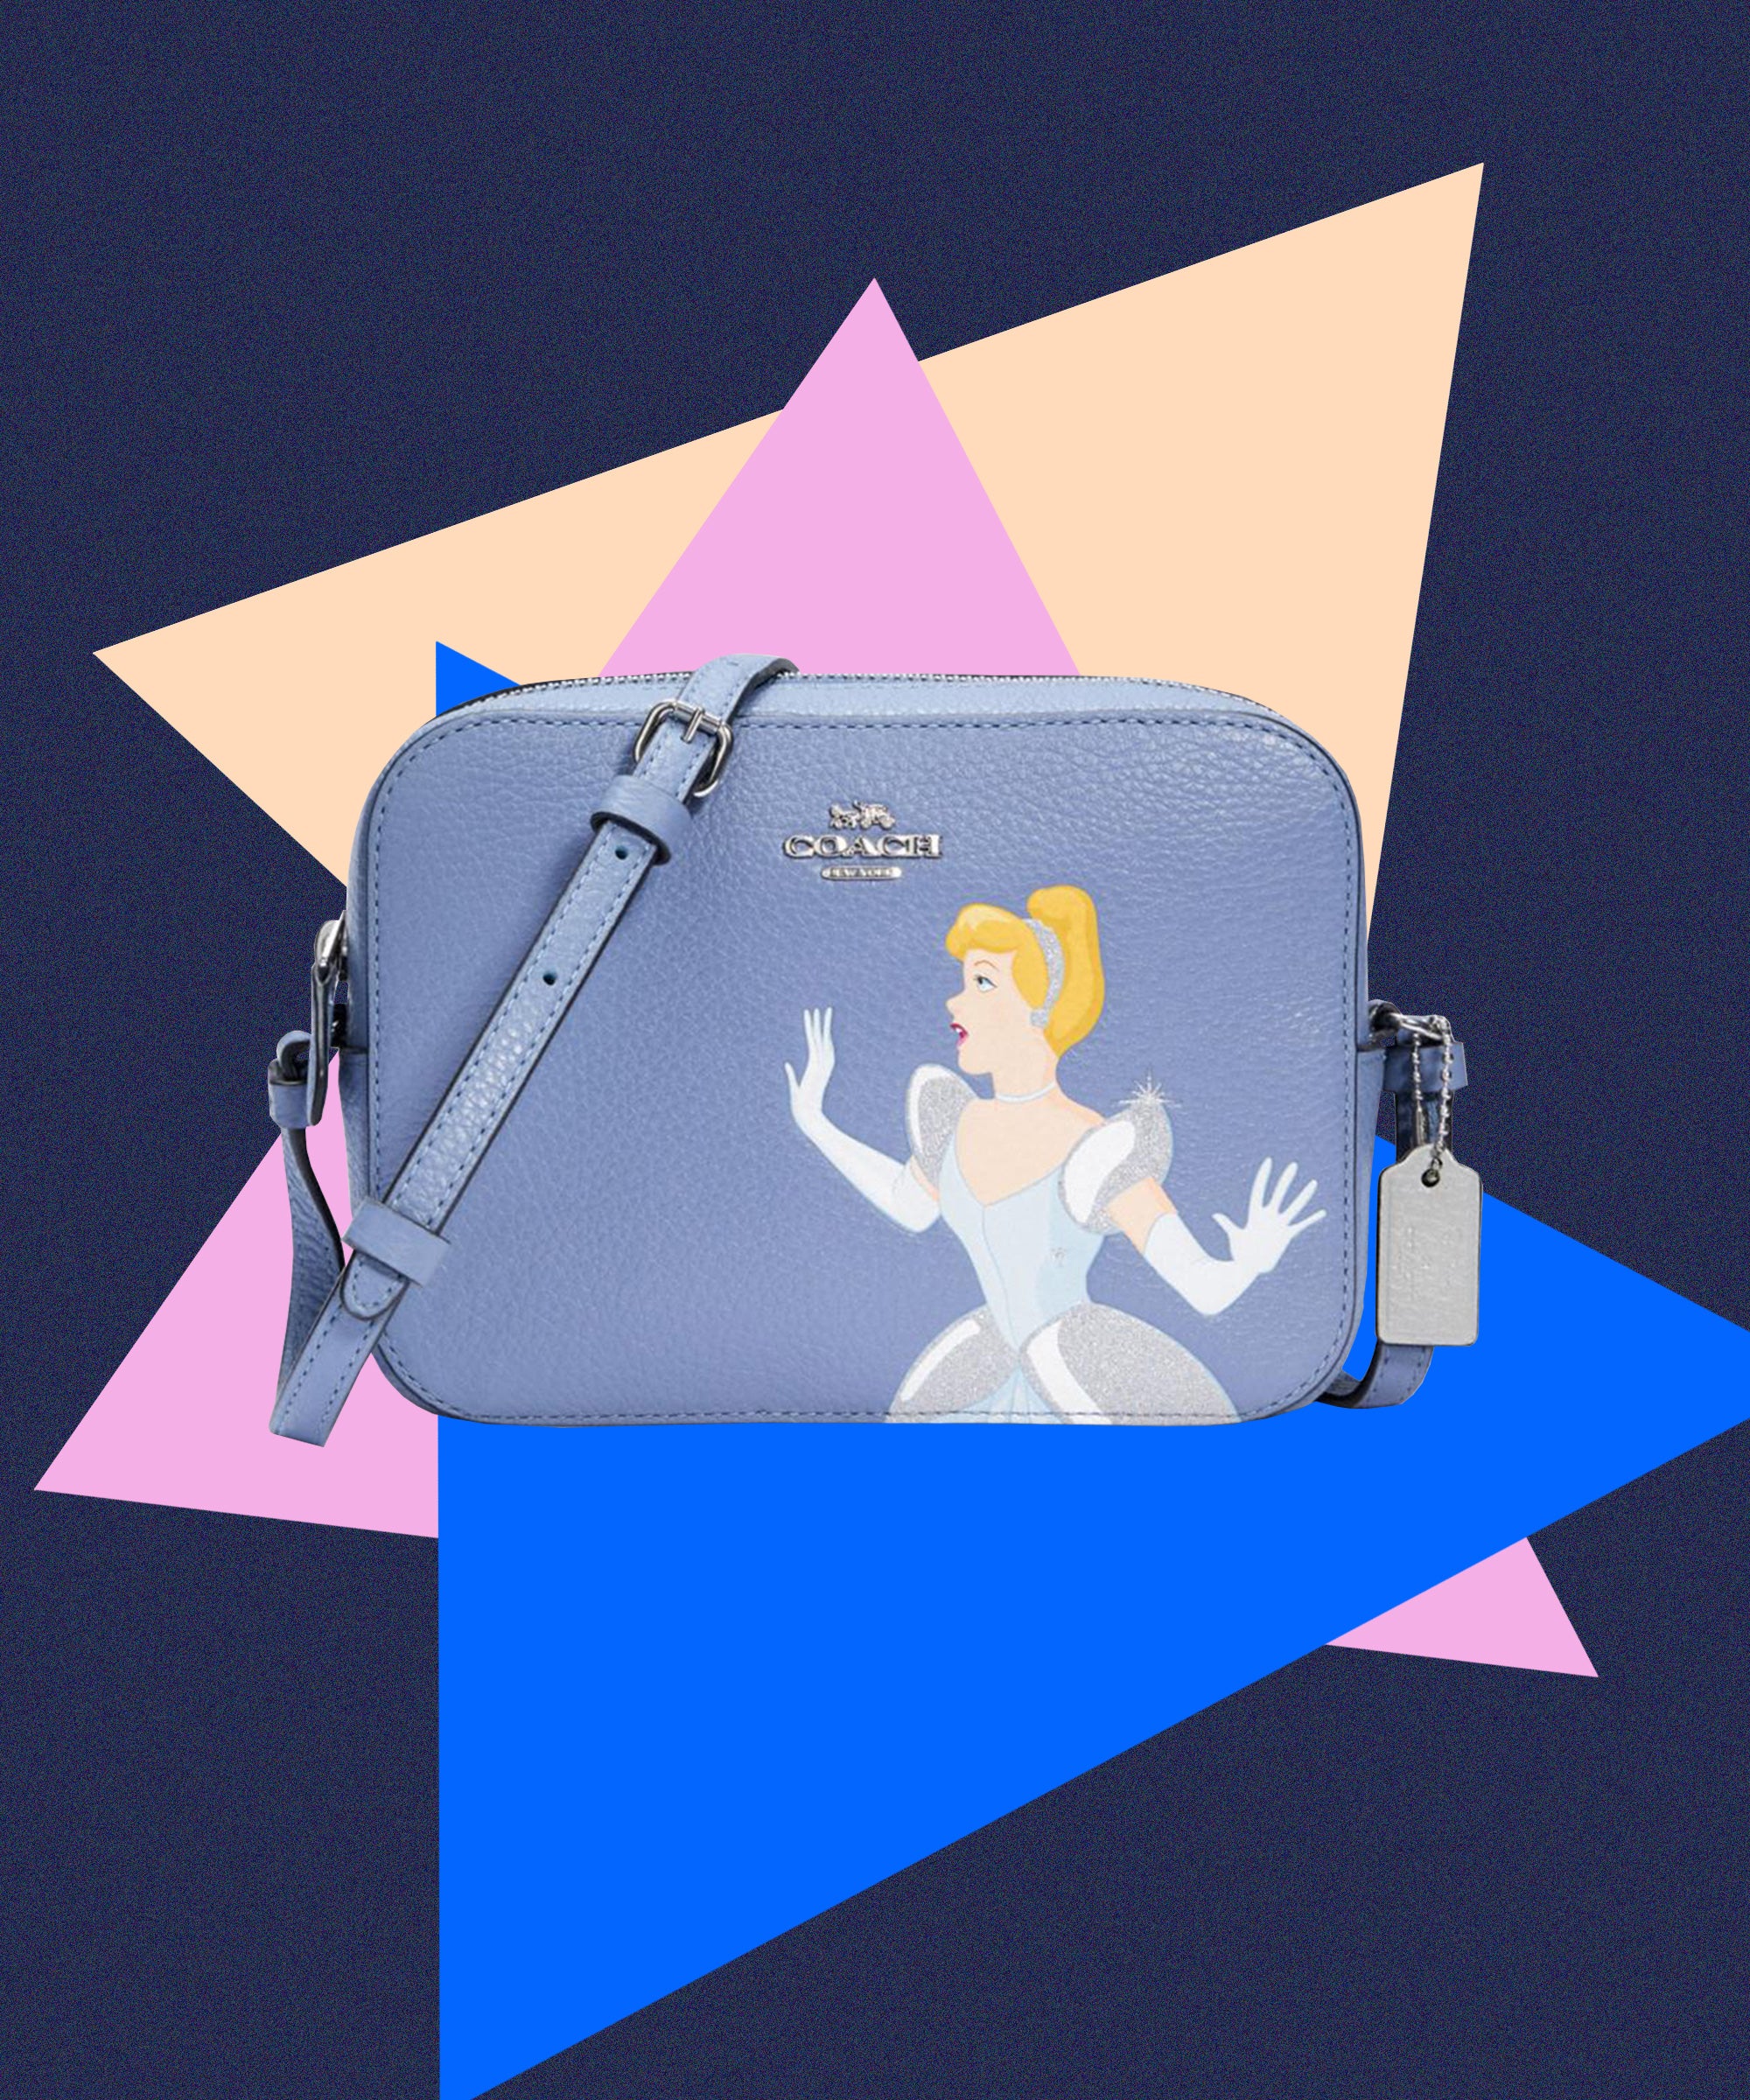 The Disney Princess Coach Outlet Collection Is Now Available For